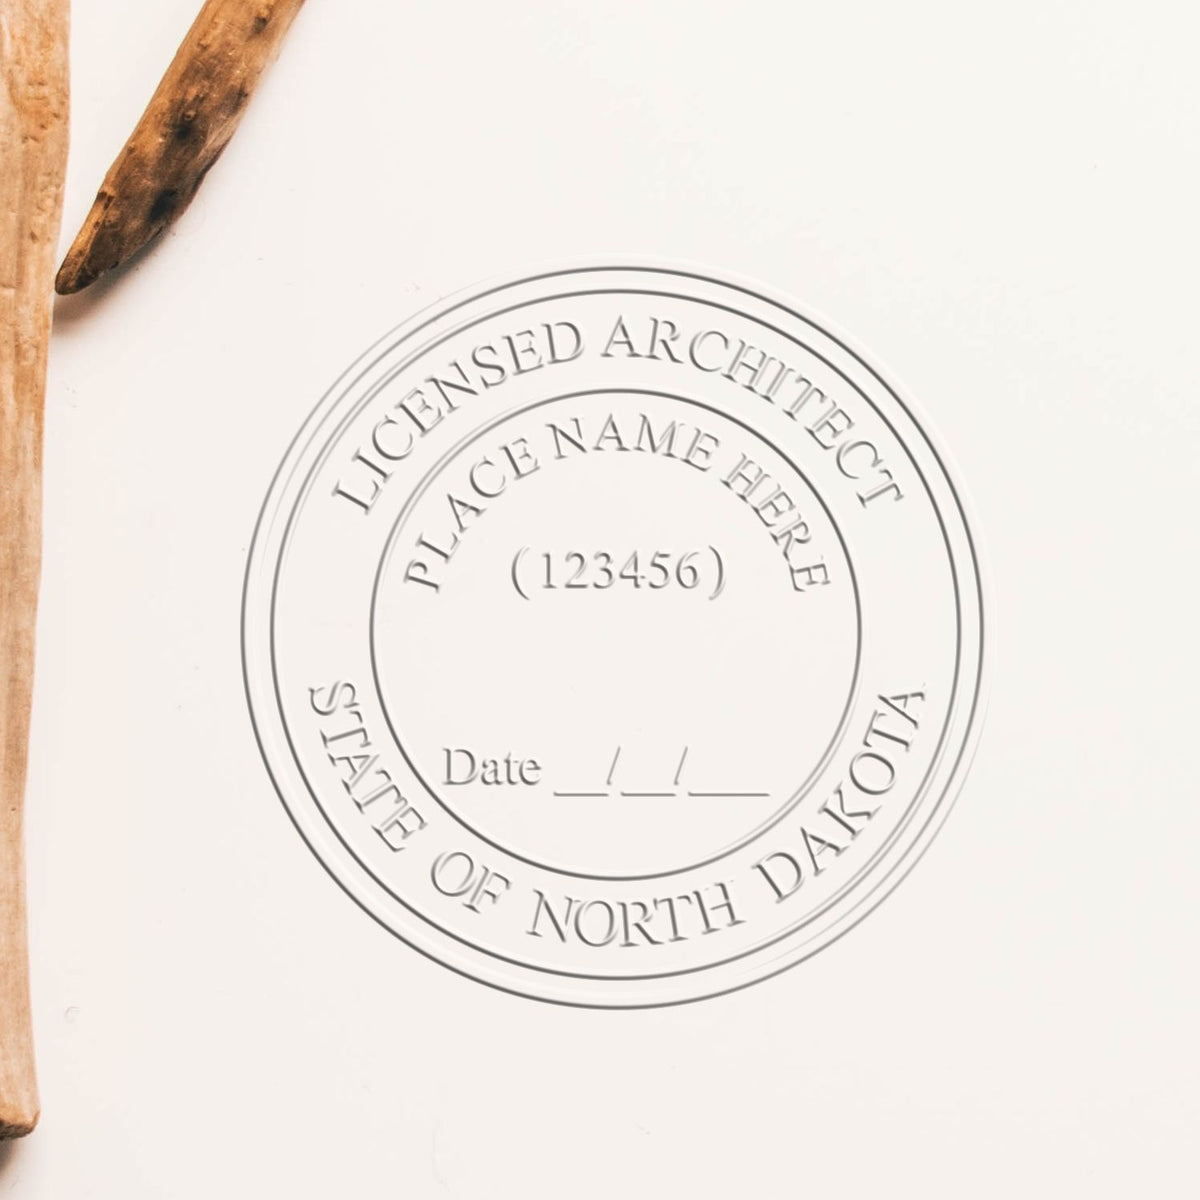 An in use photo of the Hybrid North Dakota Architect Seal showing a sample imprint on a cardstock